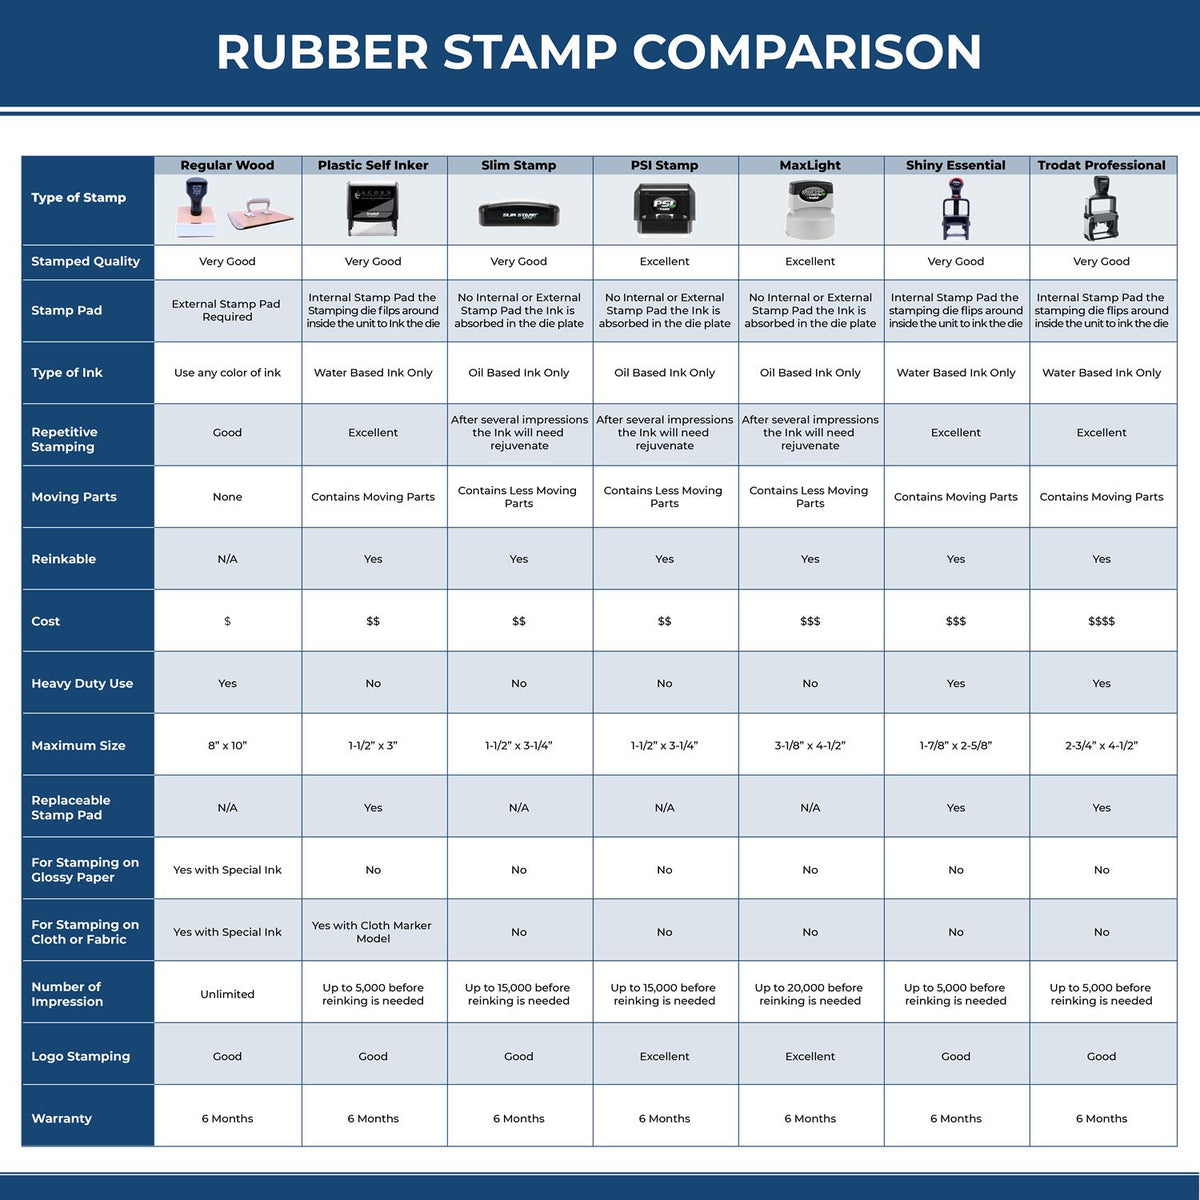 Large X-Rays Rubber Stamp 4981R Rubber Stamp Comparison